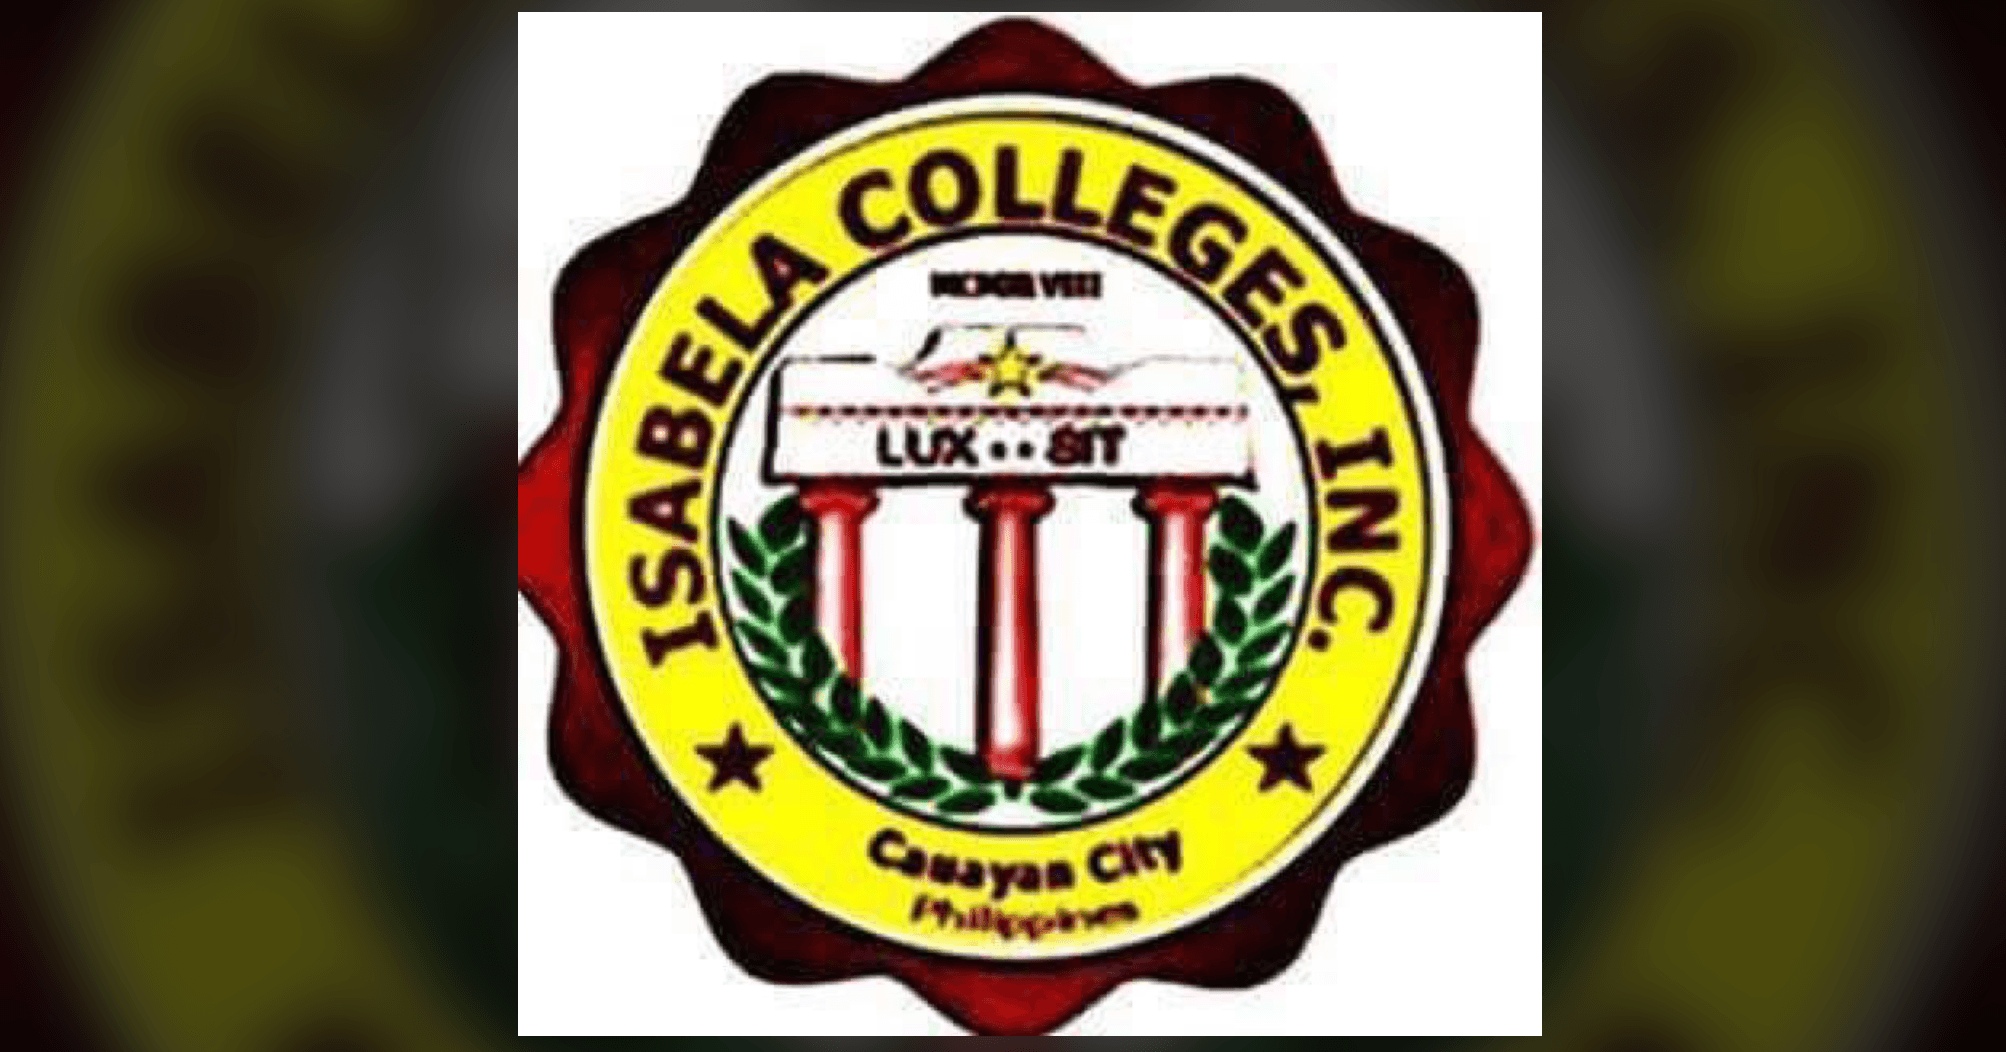 Isabela Colleges in hot water for holding face-to-face classes